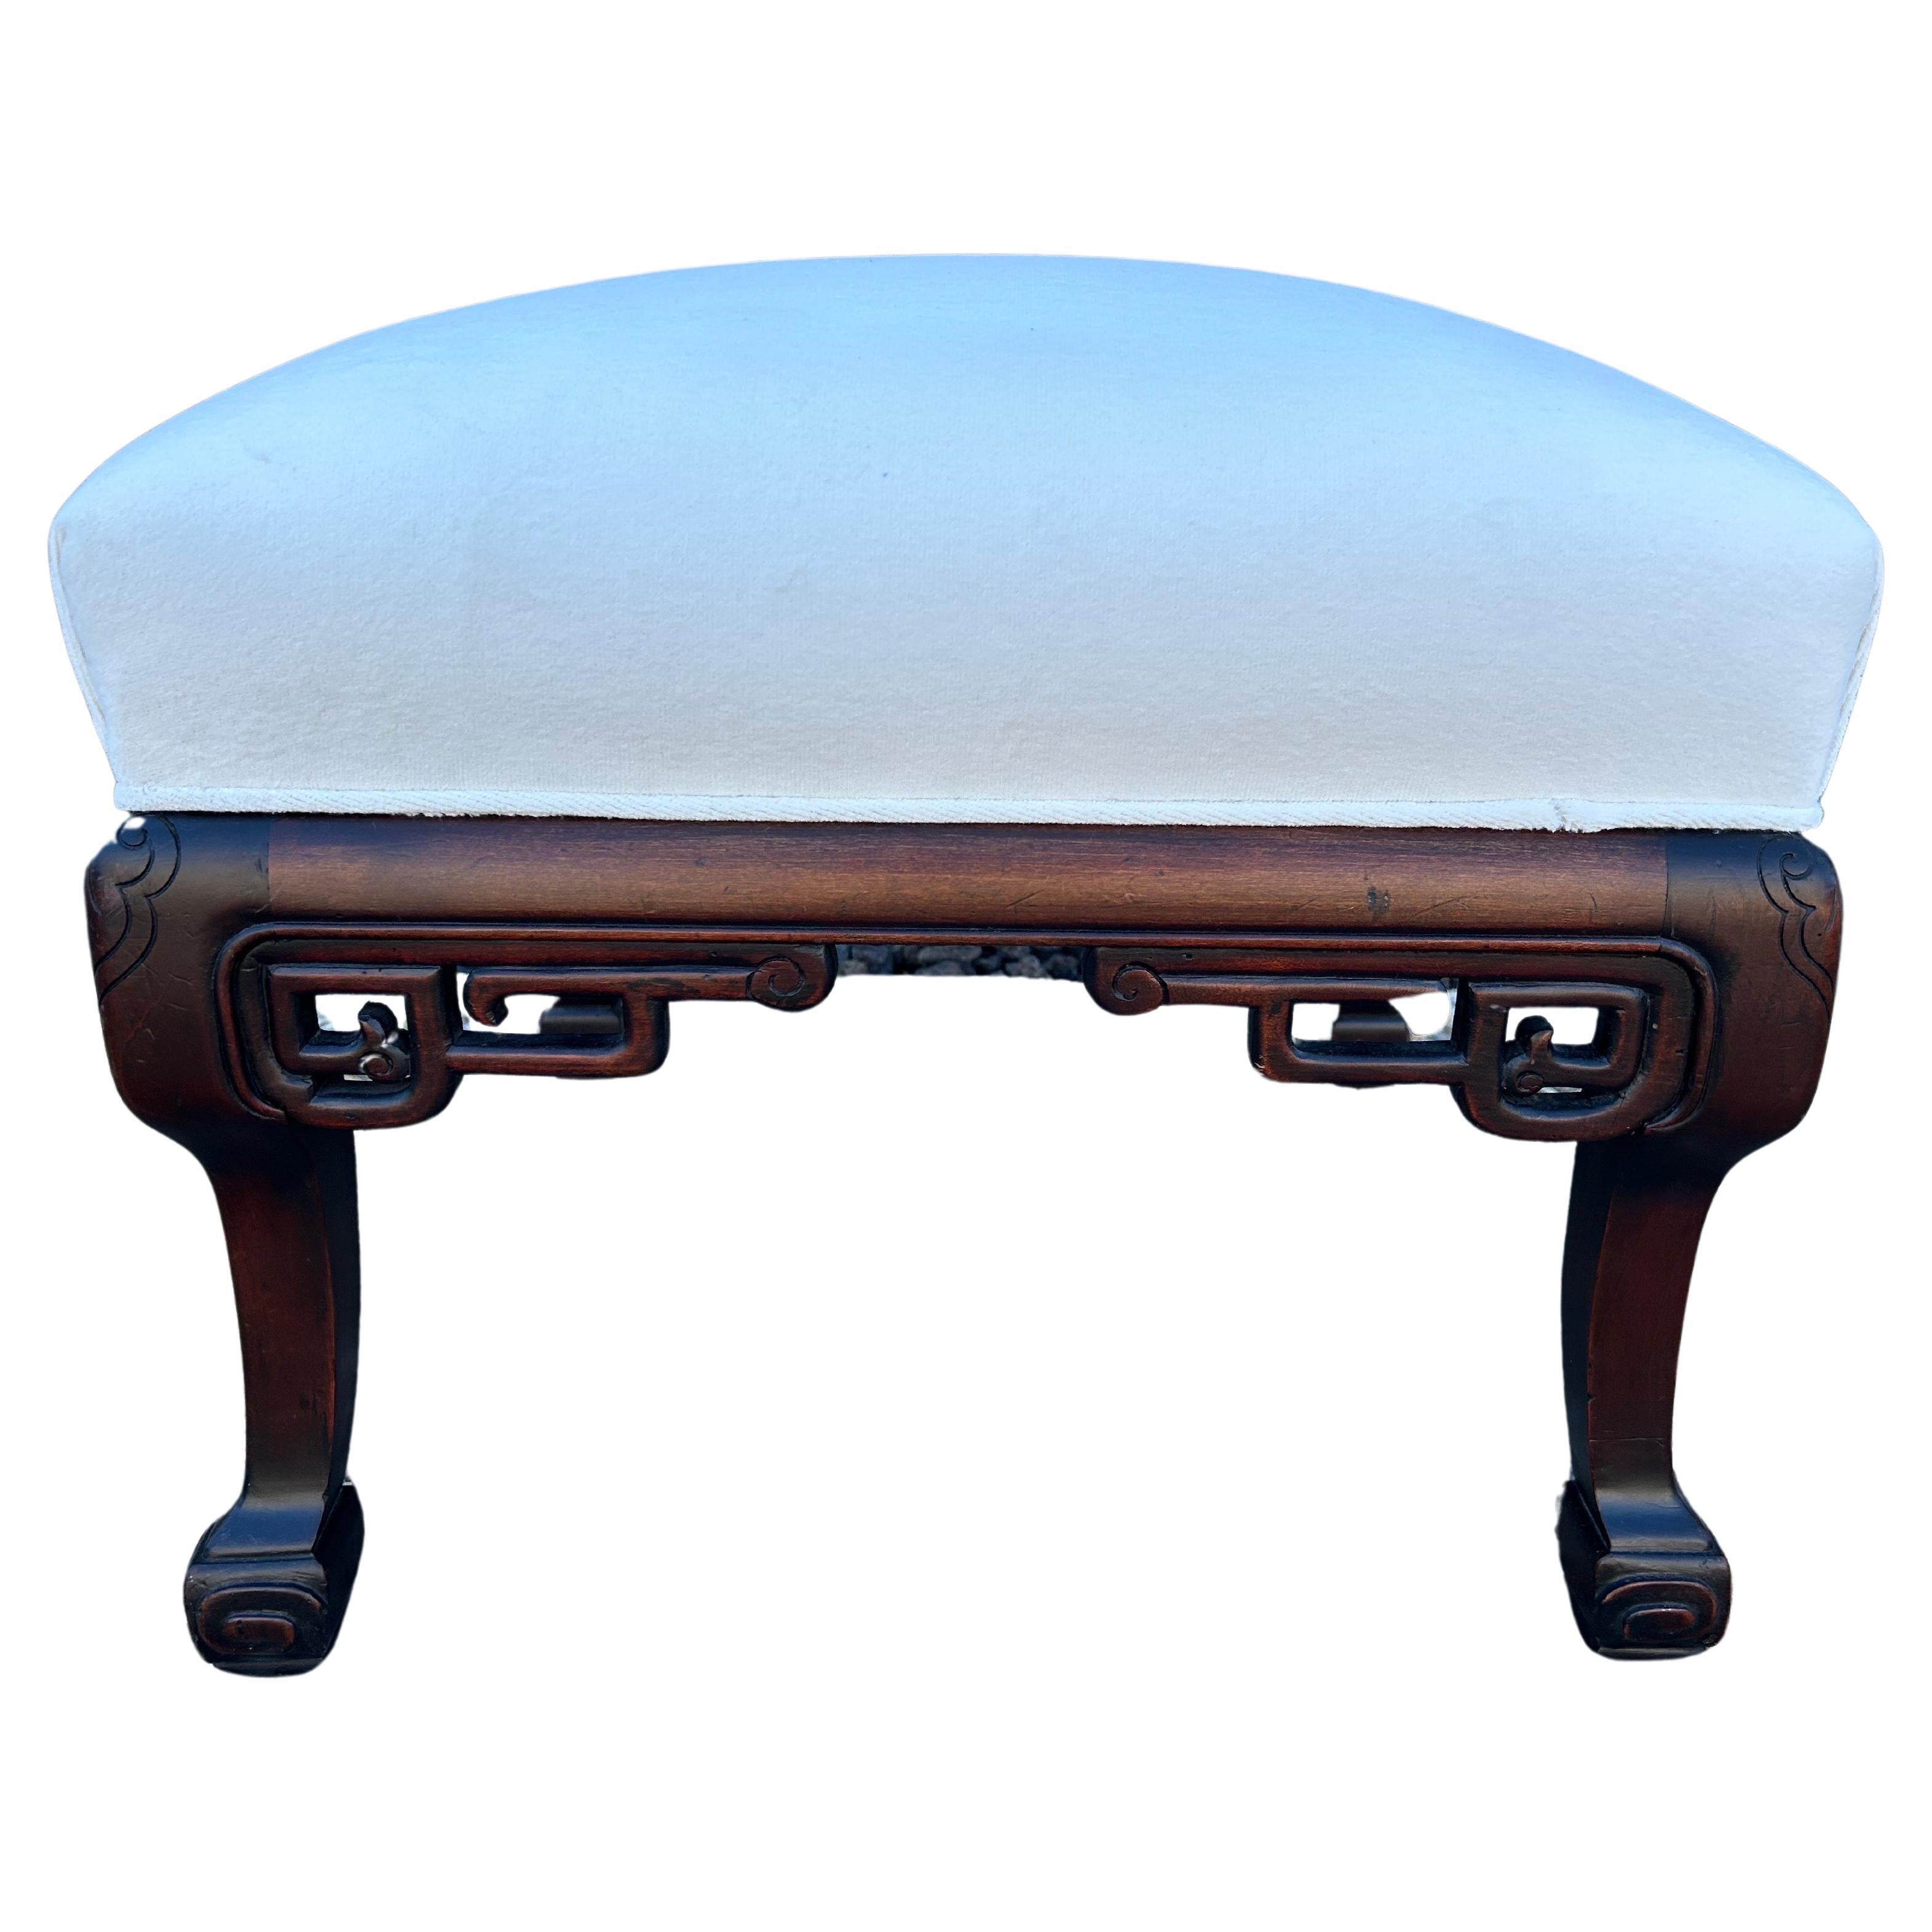 Antique Chinese Square Bench Or Ottoman For Sale